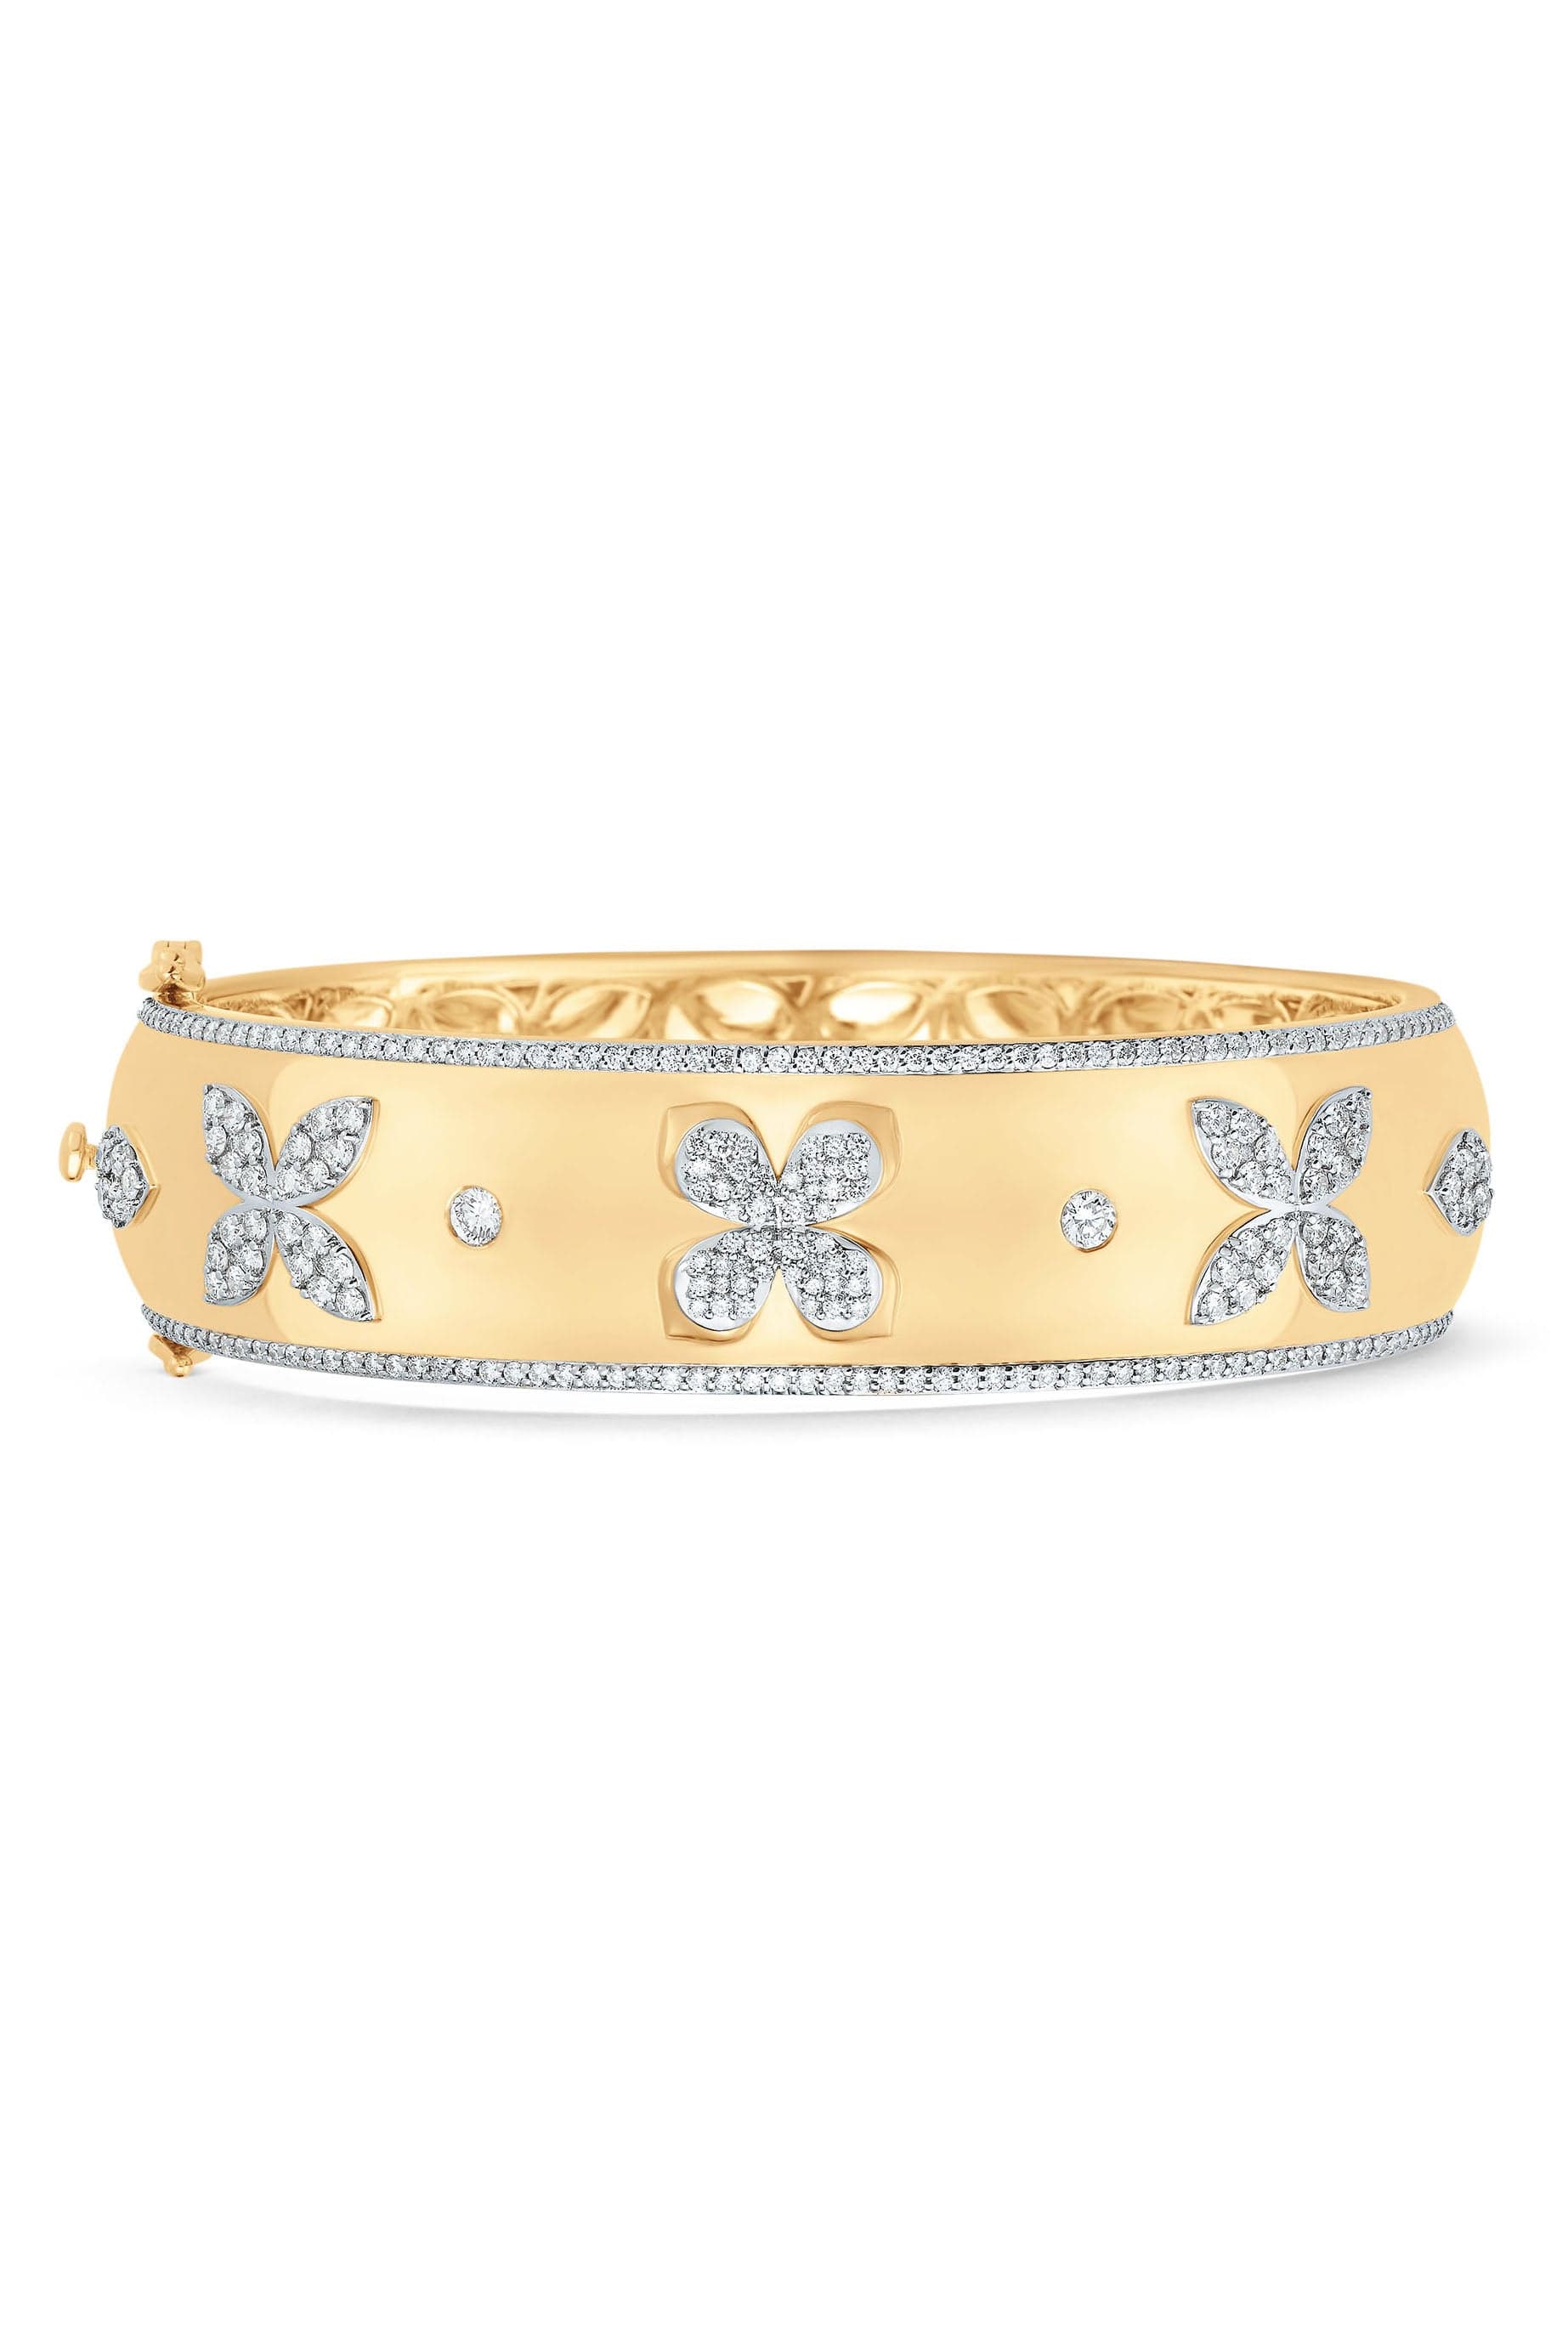 SARA WEINSTOCK-Lierre Diamond Petal and Marquise Cluster Cigar Bangle-YELLOW GOLD